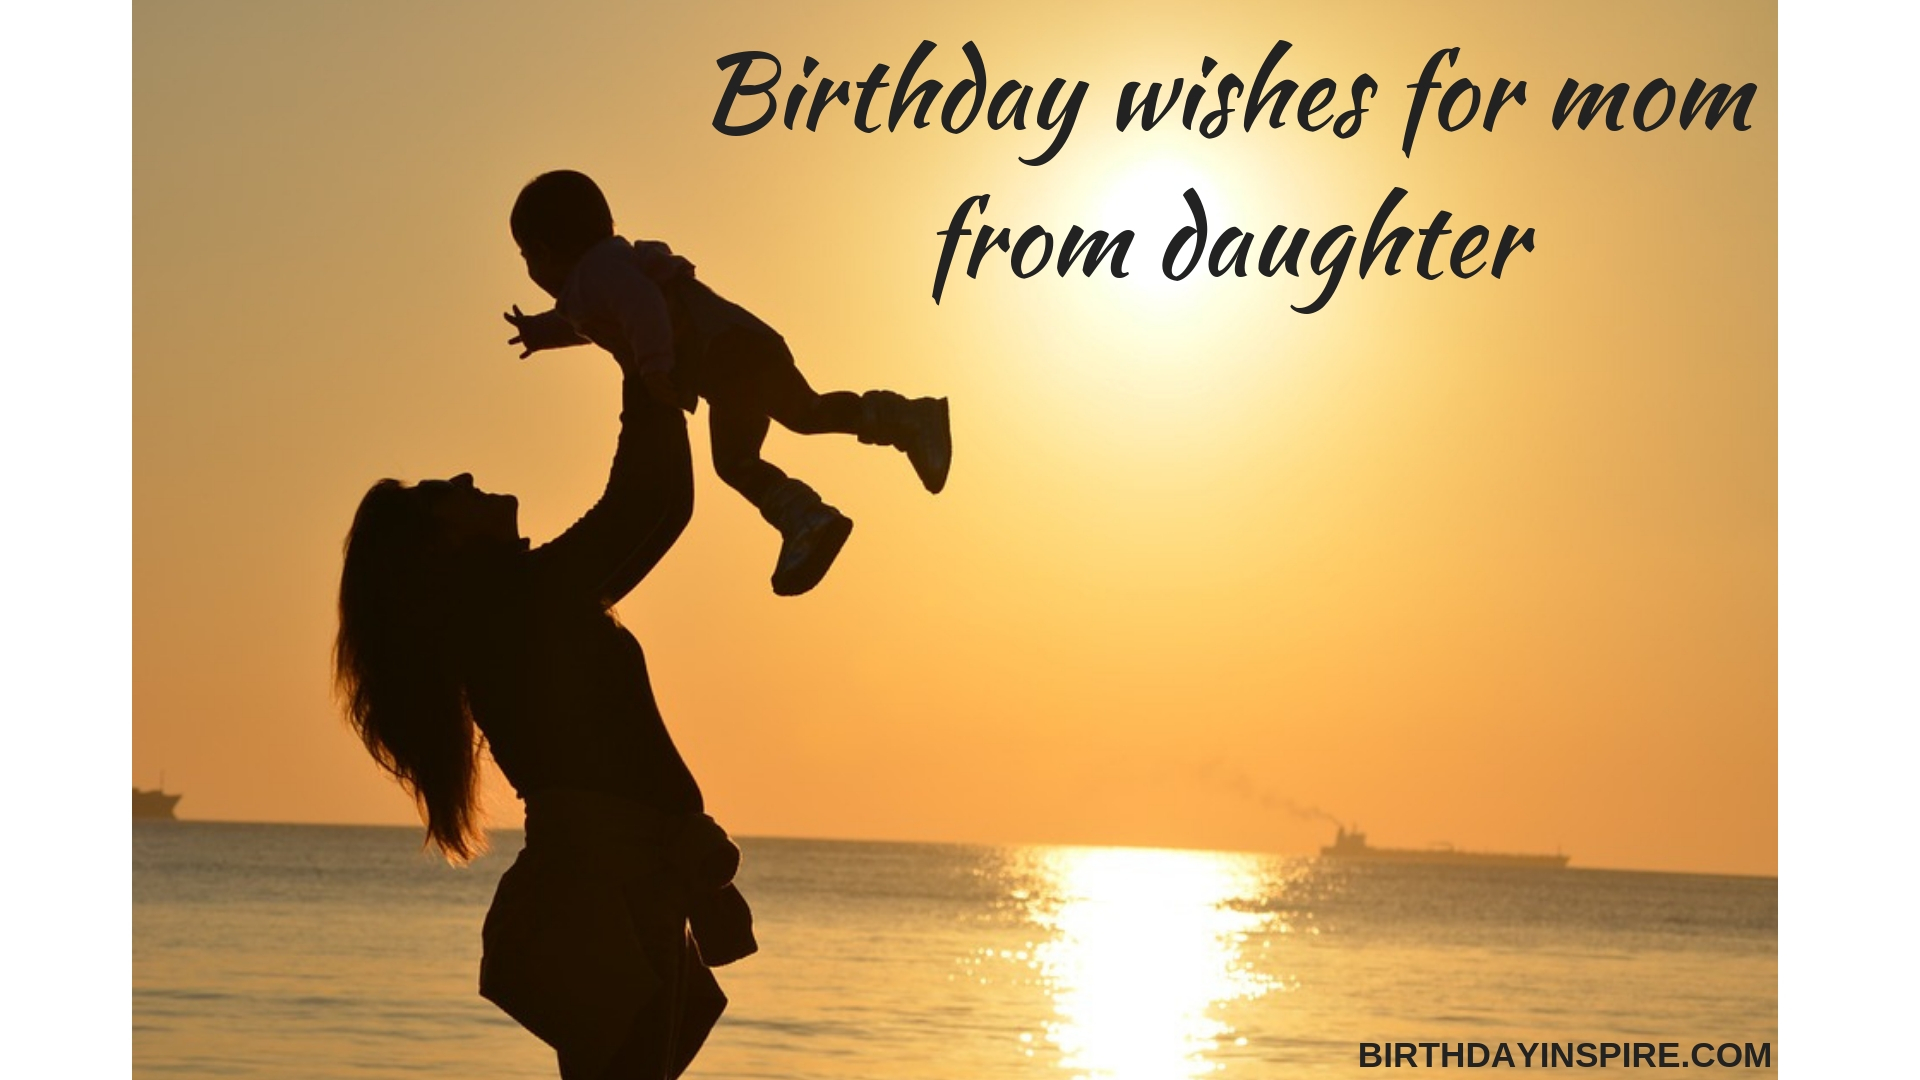 BIRTHDAY WISHES FOR MOM FROM DAUGHTER